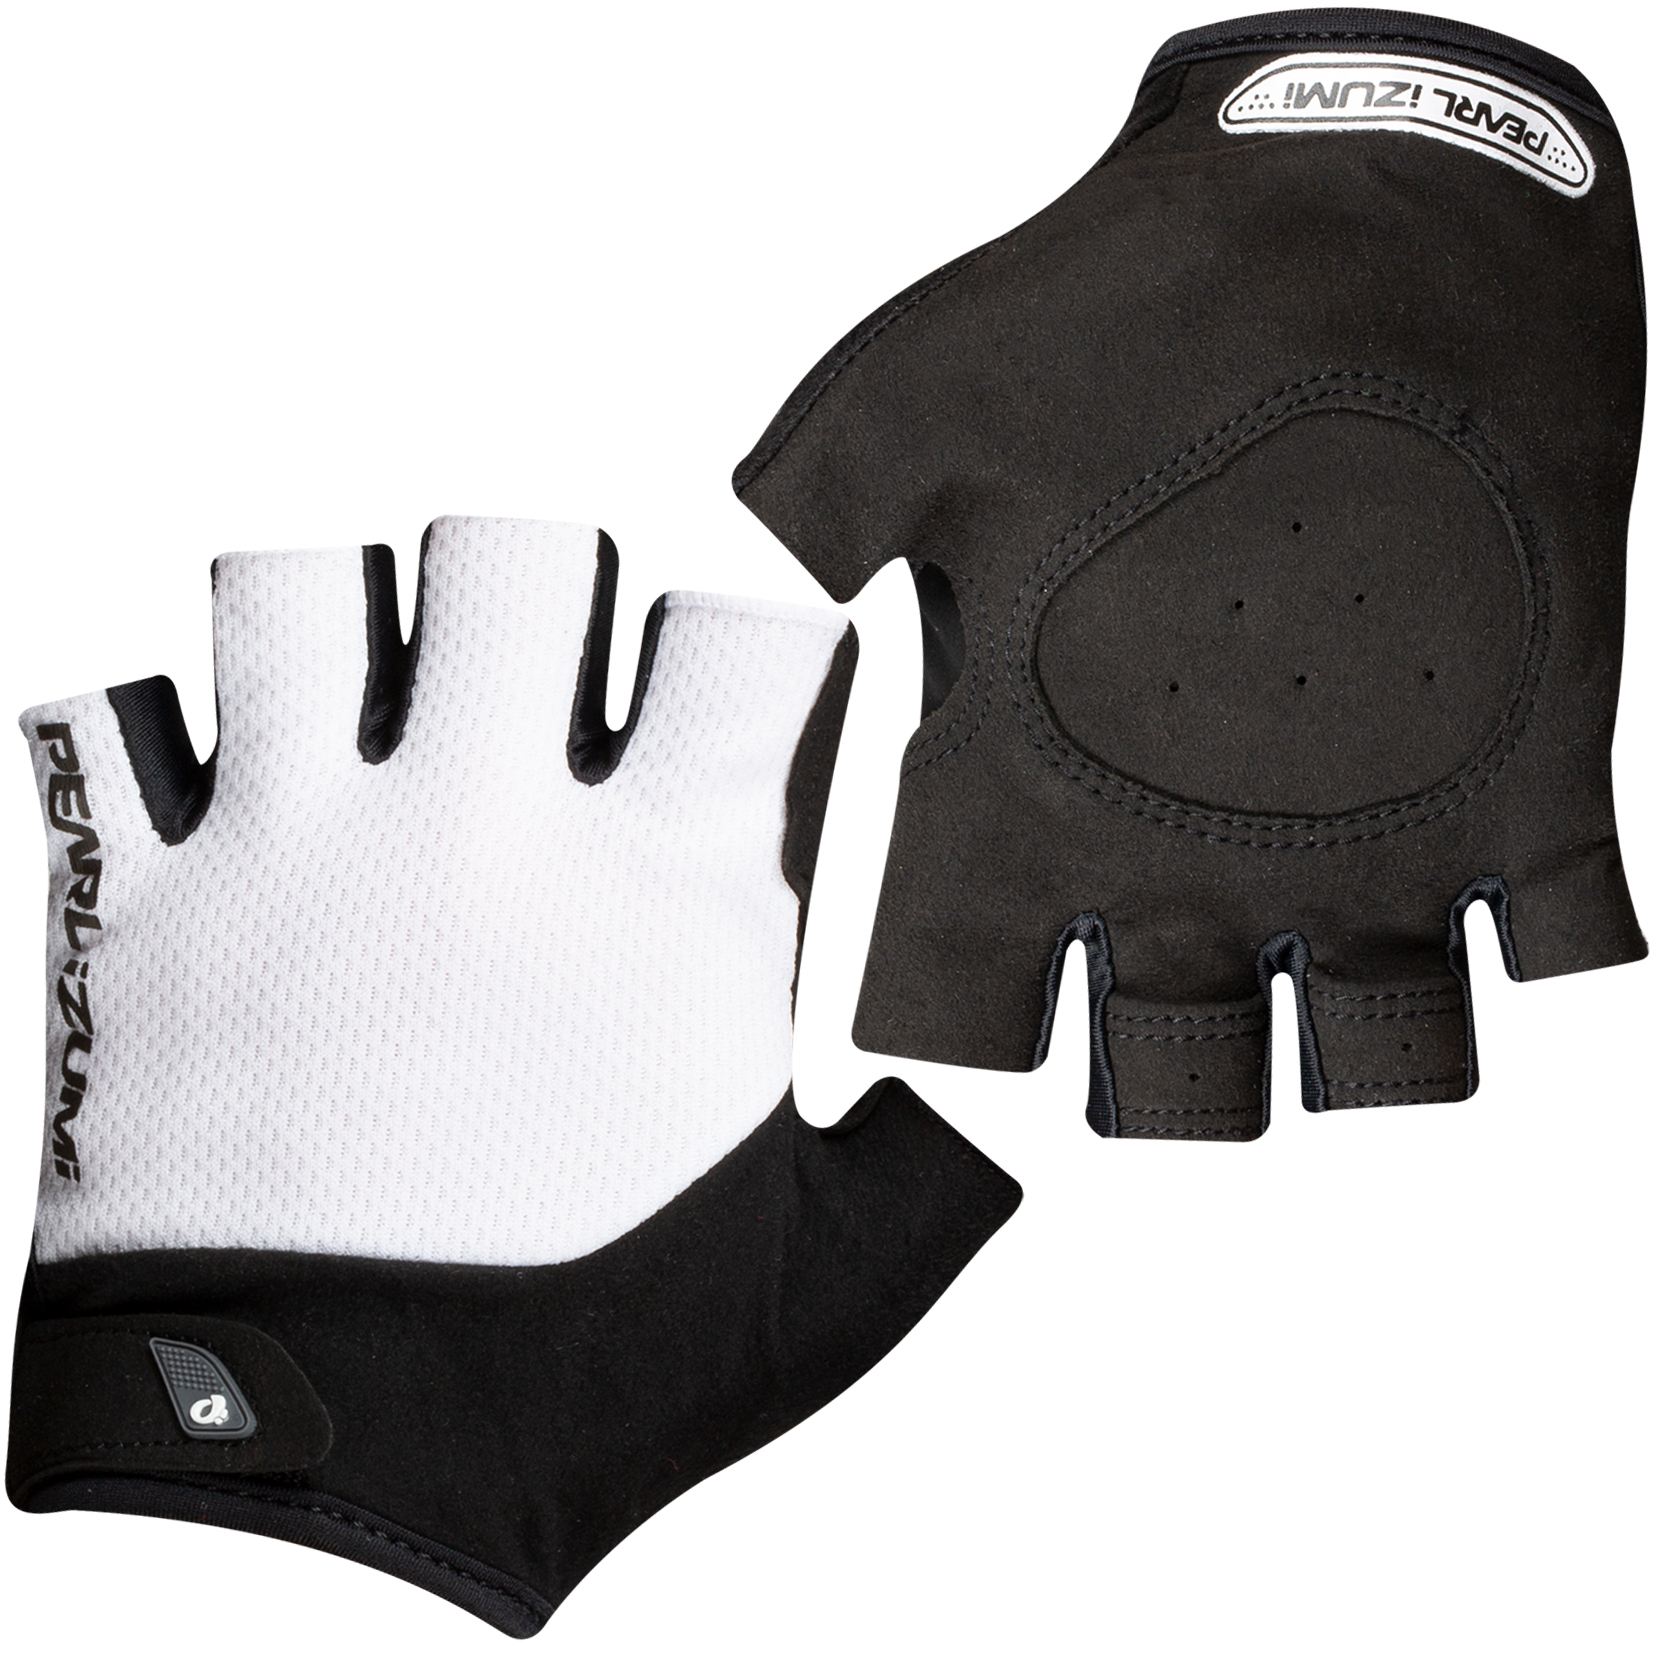 CYCLE L,XL WHITE GEL PADDED FJS CYLING BIKE MTB BICYCLE GLOVES S,M 